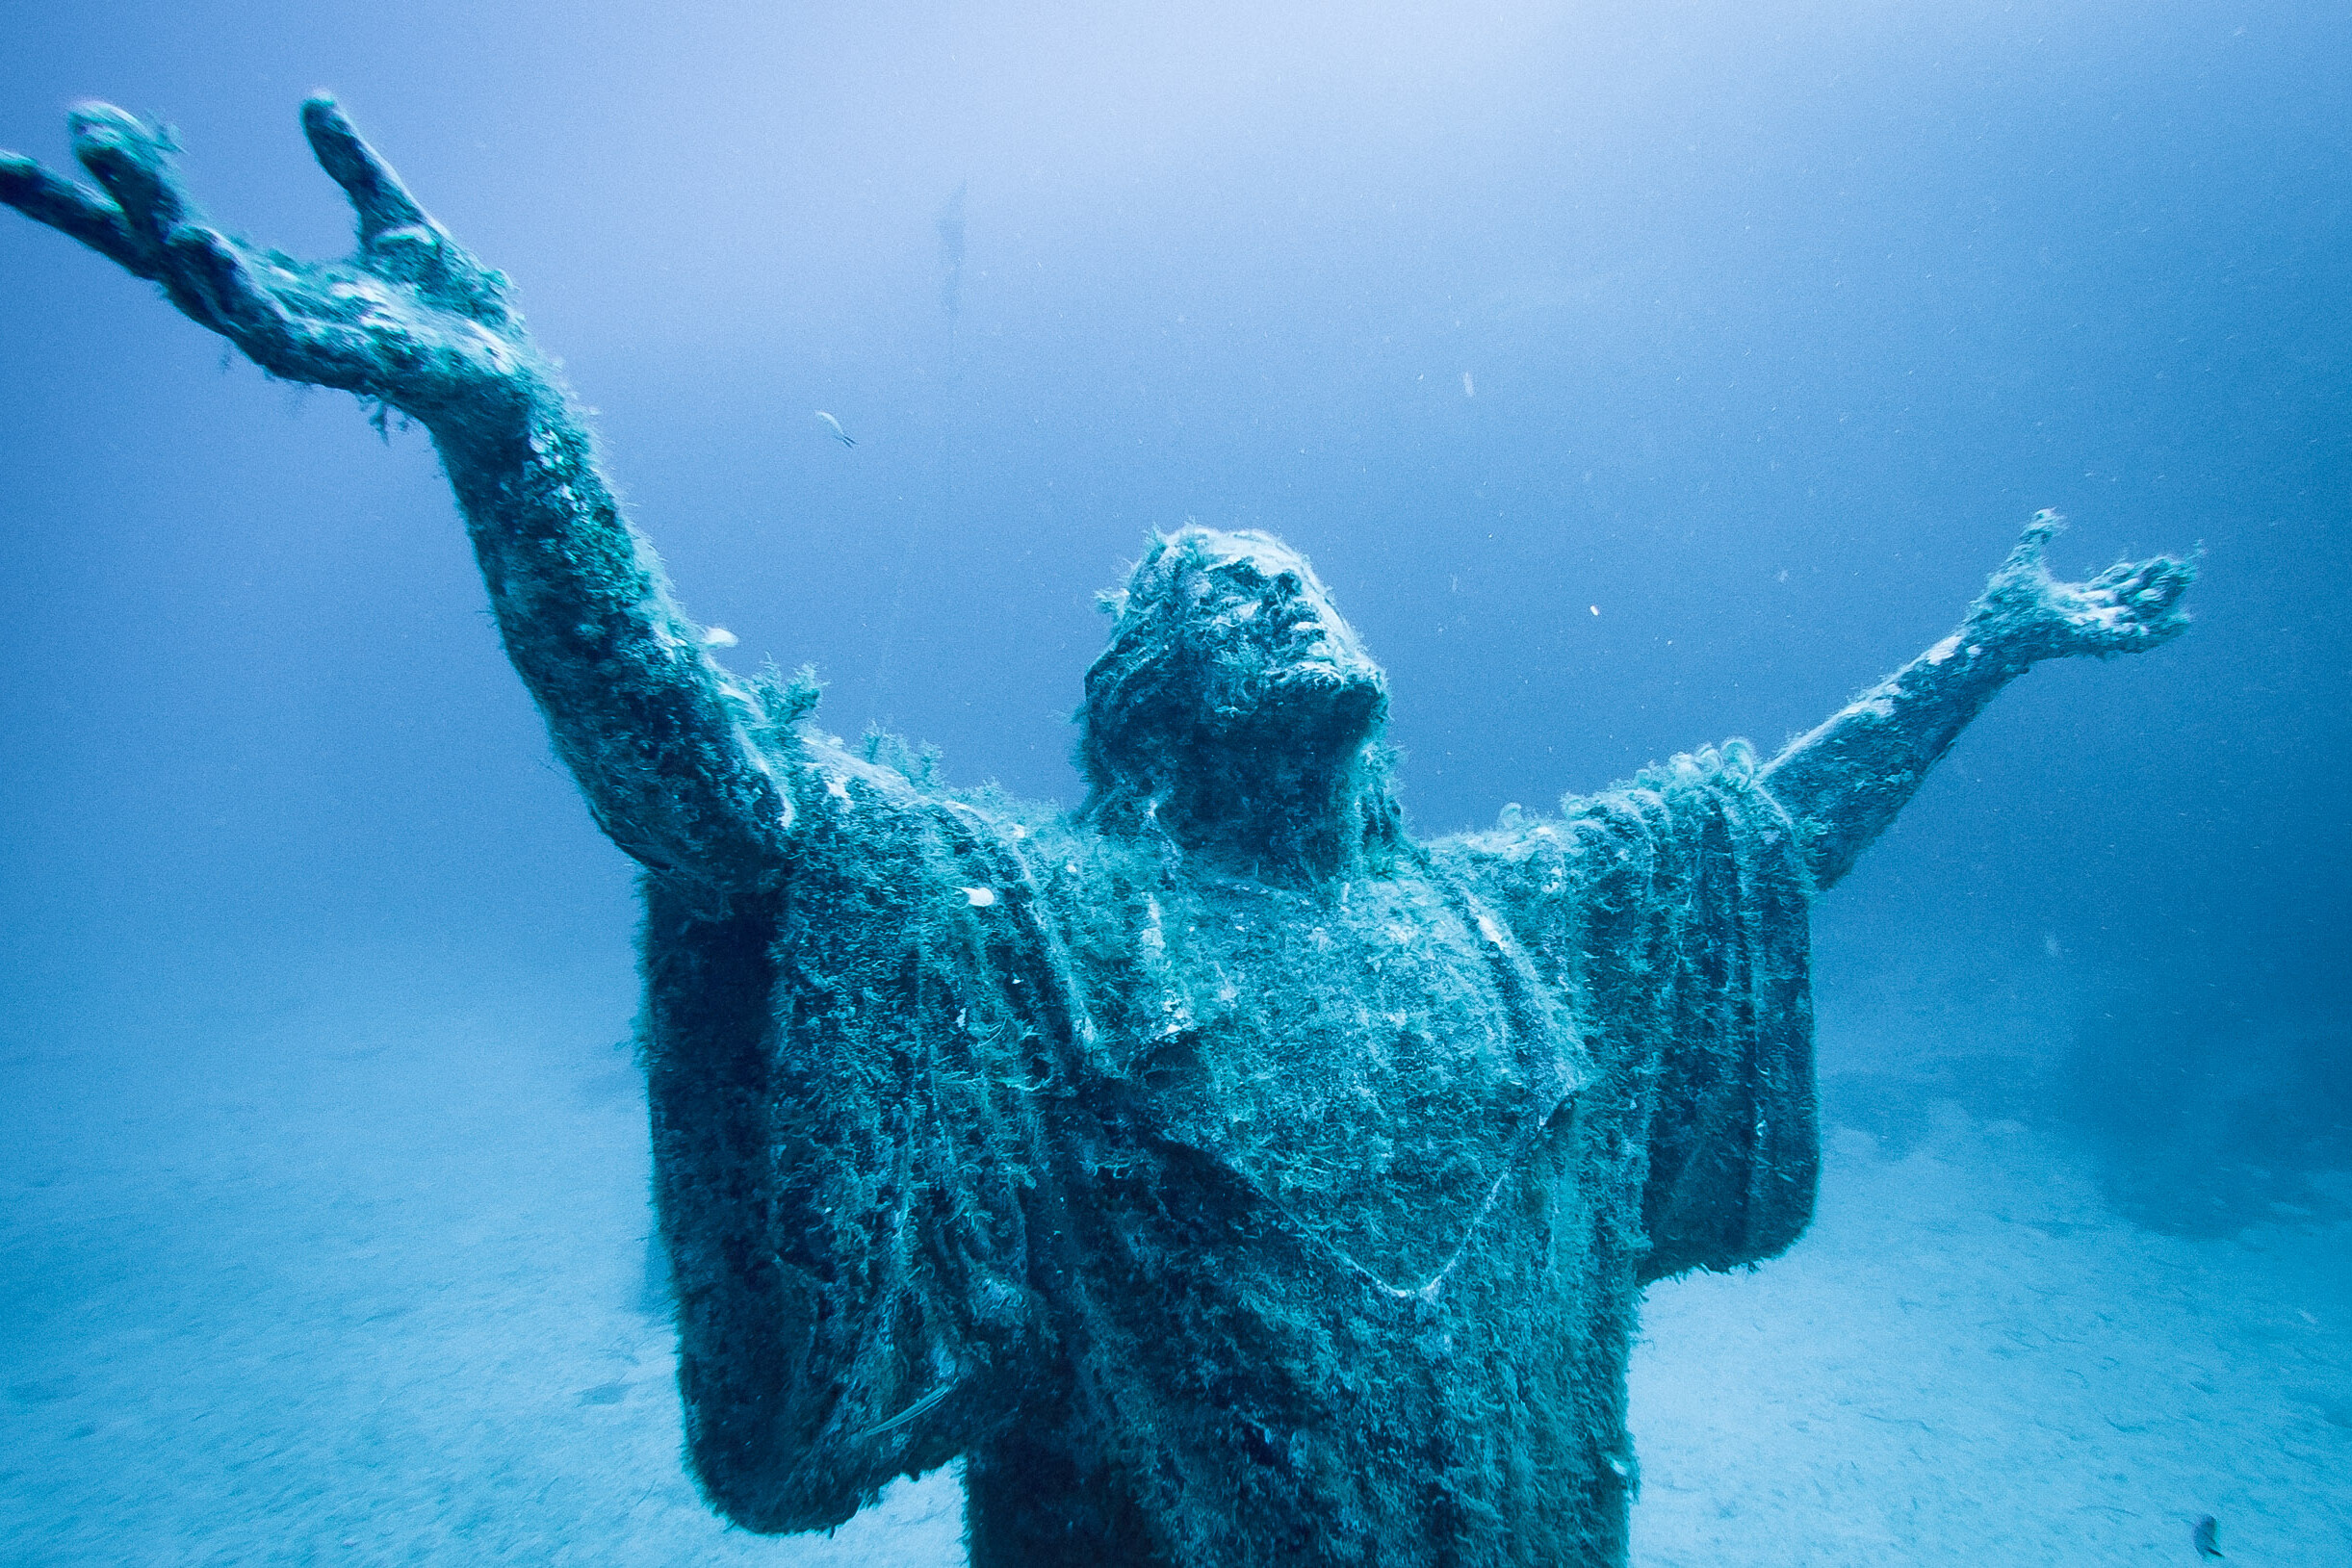 Christ of the sailors